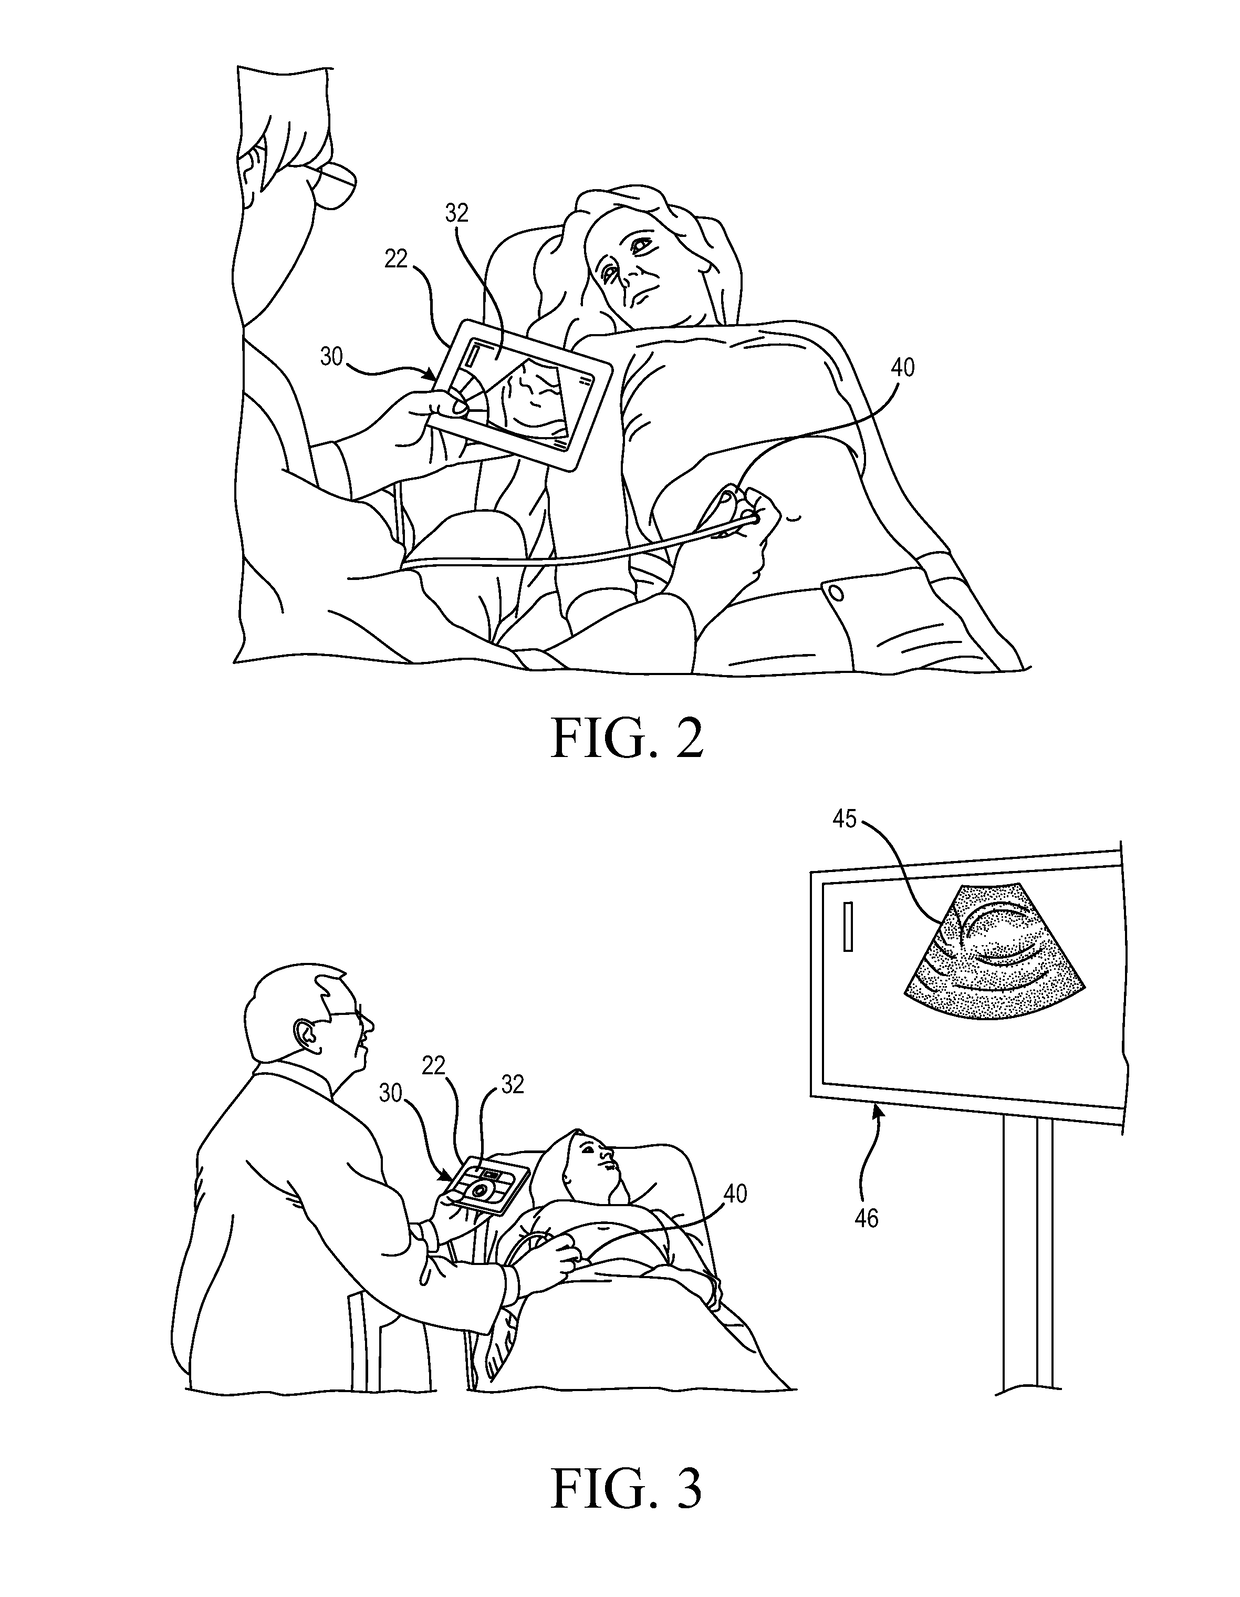 Dual display presentation apparatus for portable medical ultrasound scanning systems